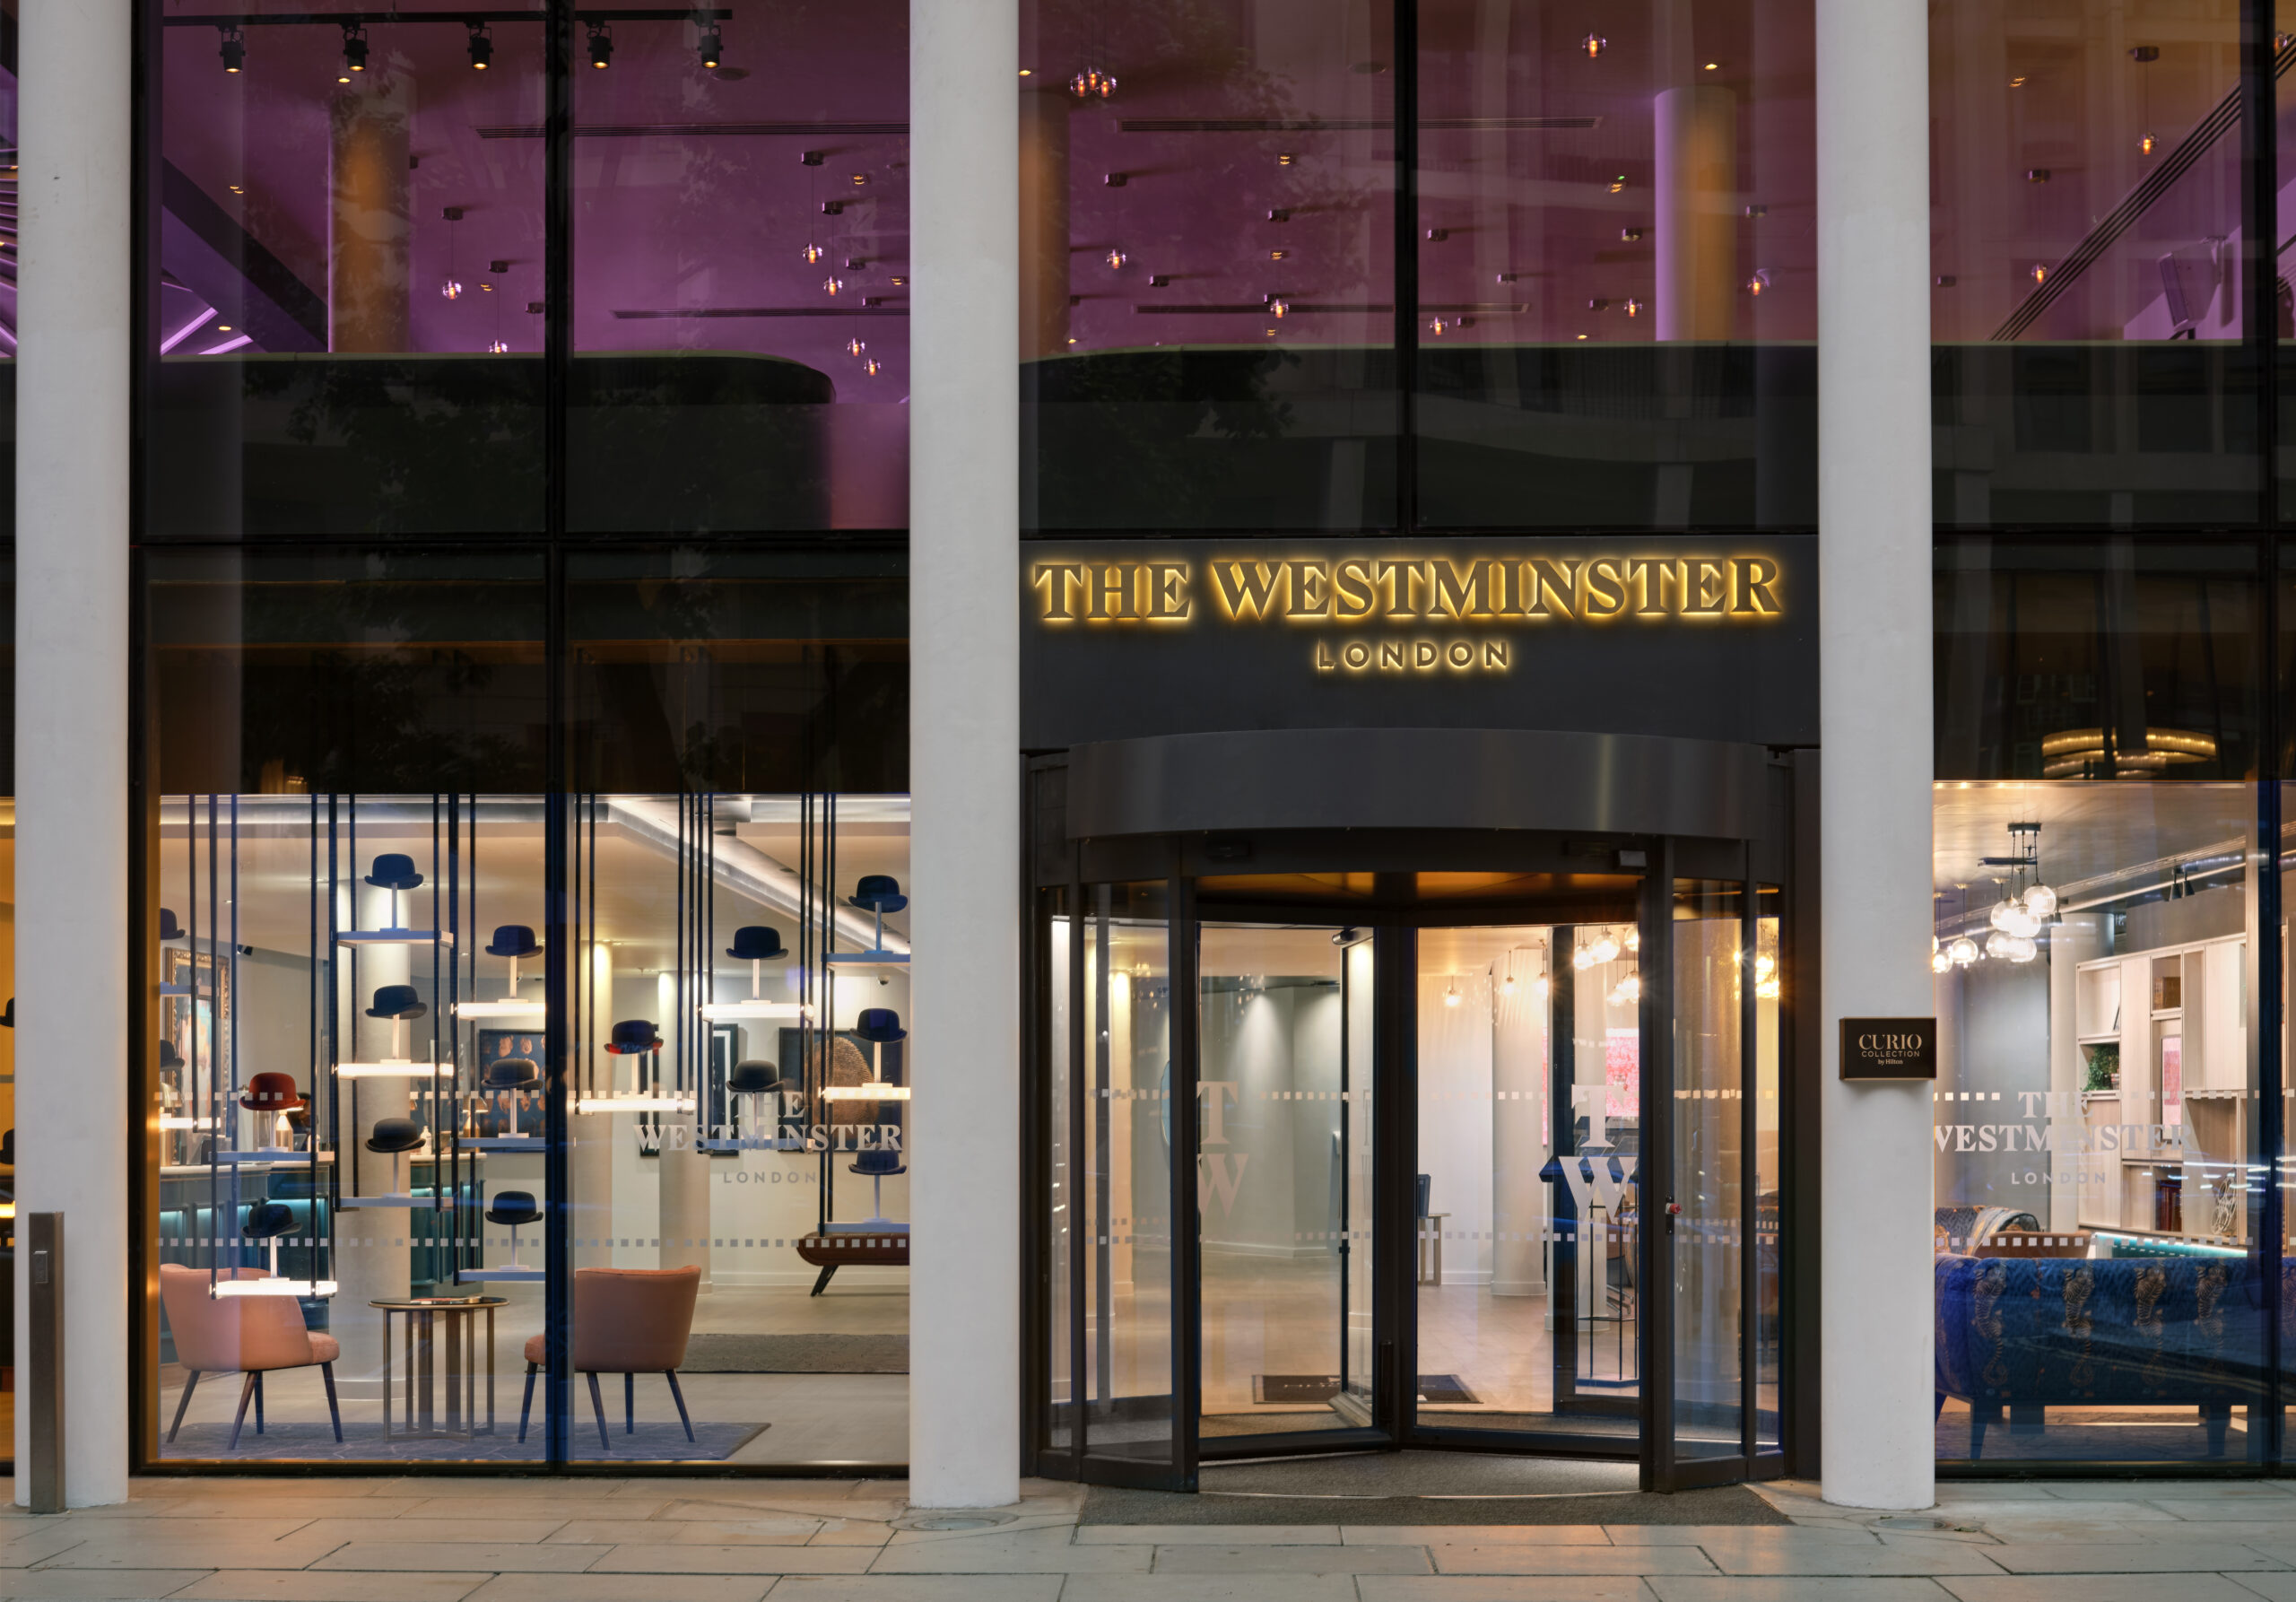 The Westminster London, Curio collection by Hilton hotel review